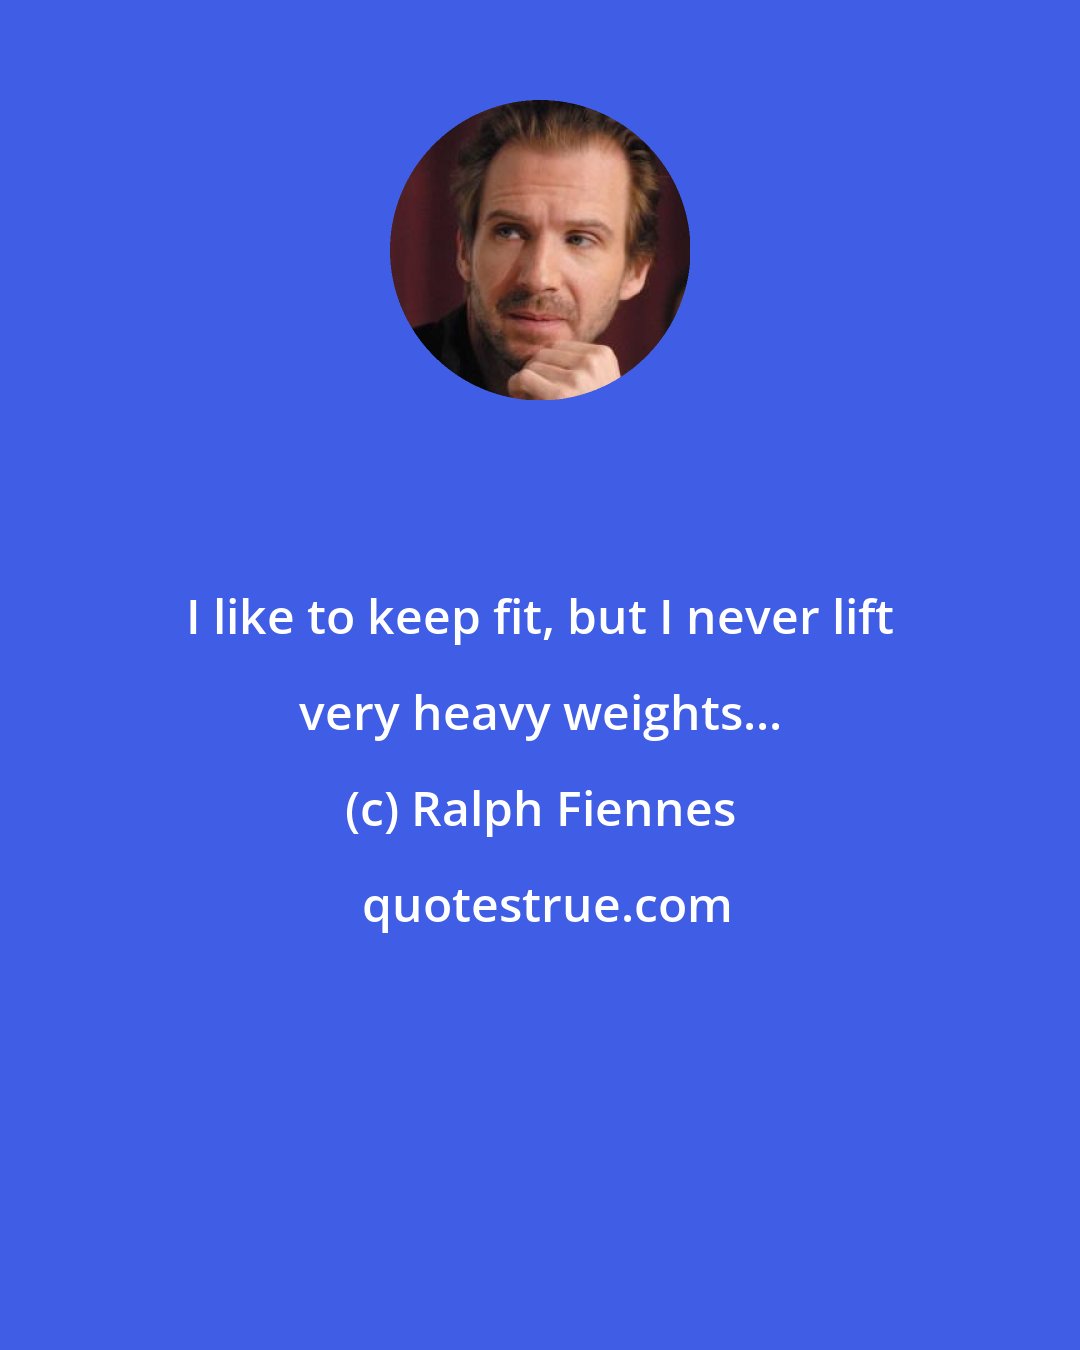 Ralph Fiennes: I like to keep fit, but I never lift very heavy weights...